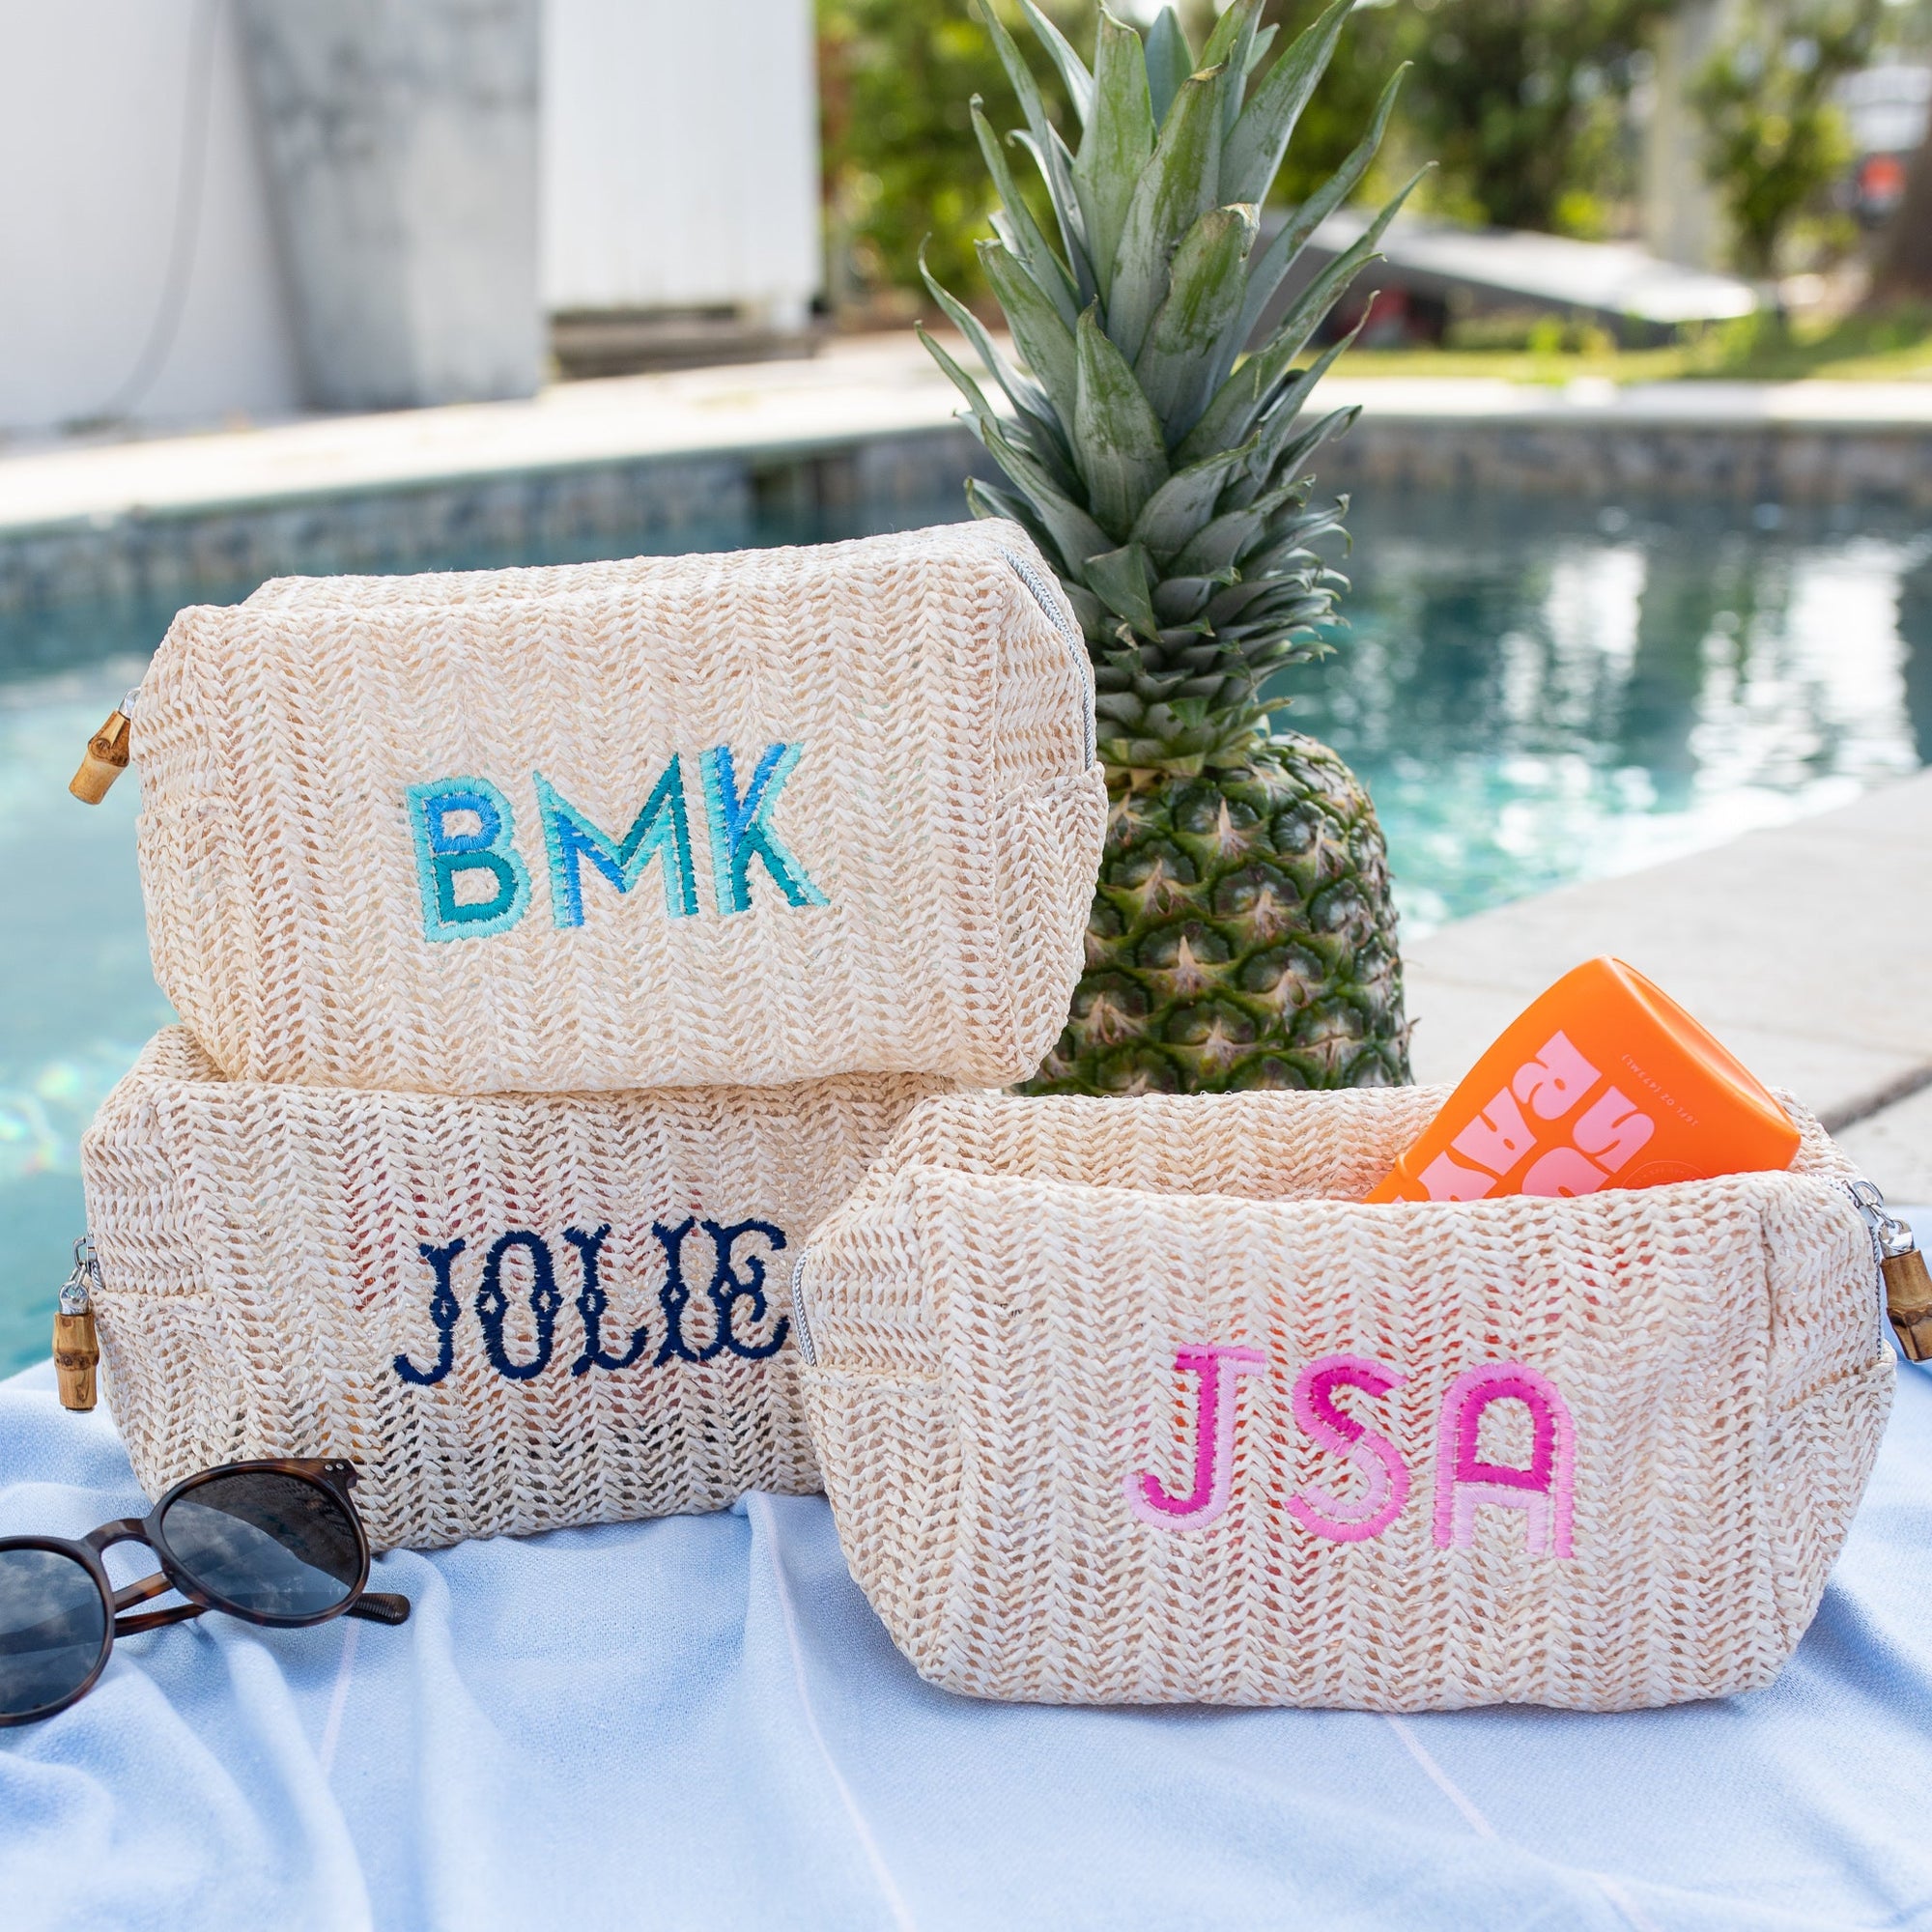 A straw pouch is customized with a name embroidered in navy font